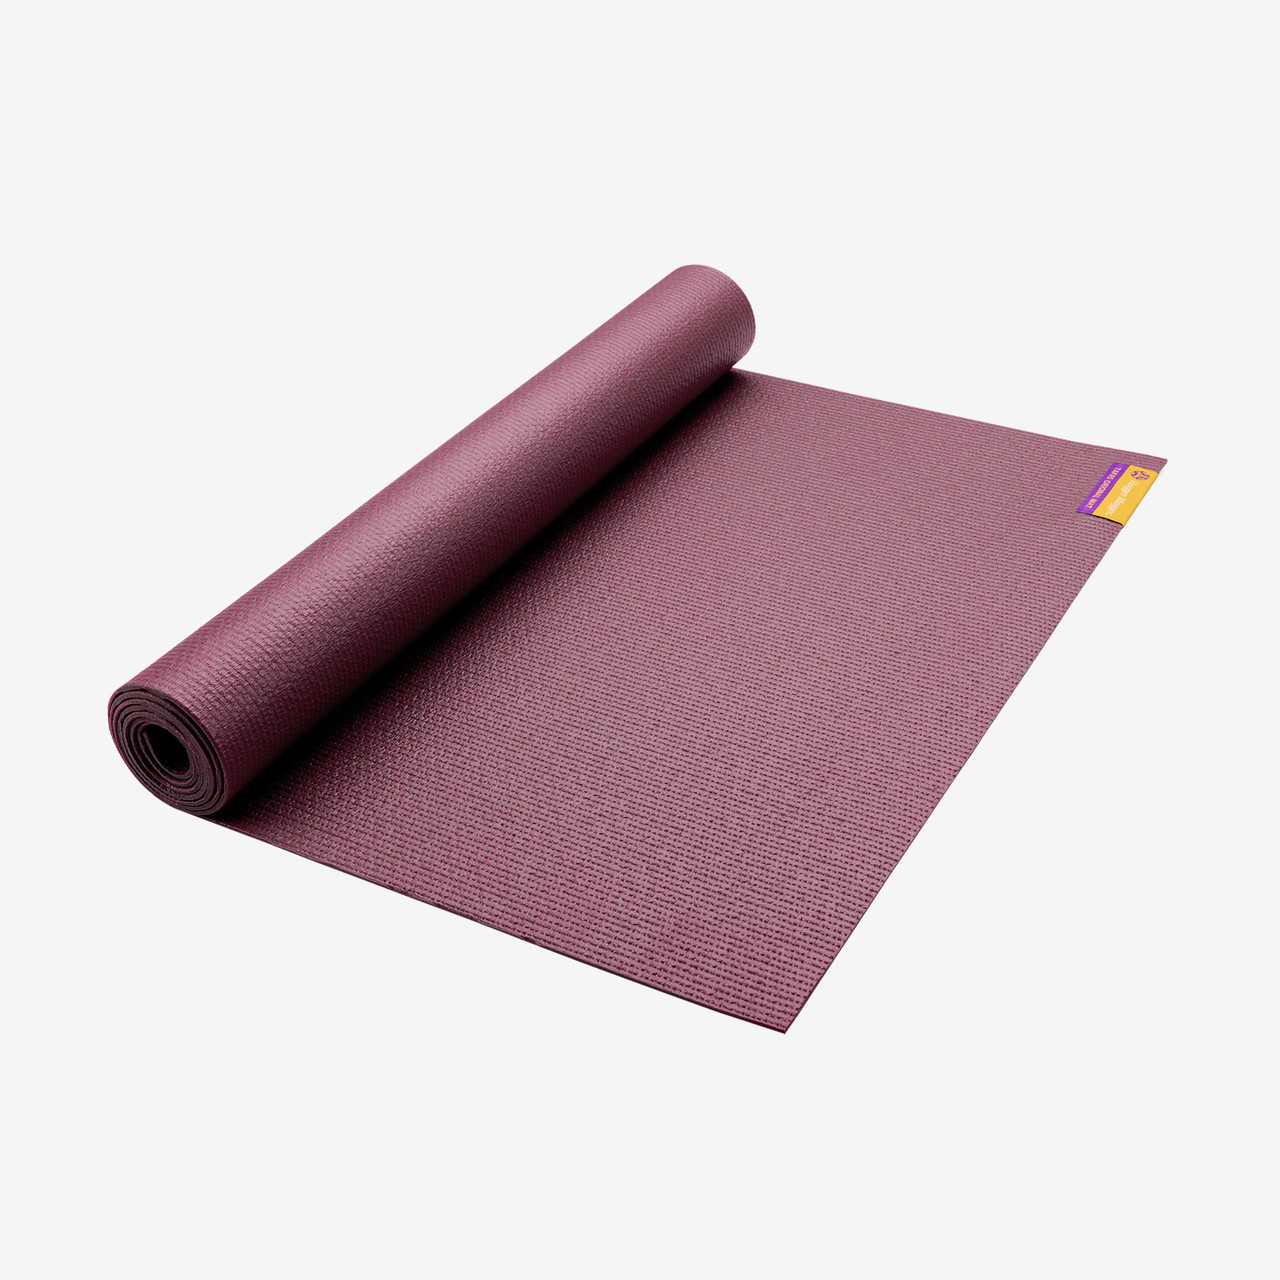 The 9 best yoga mats to help you find your flow